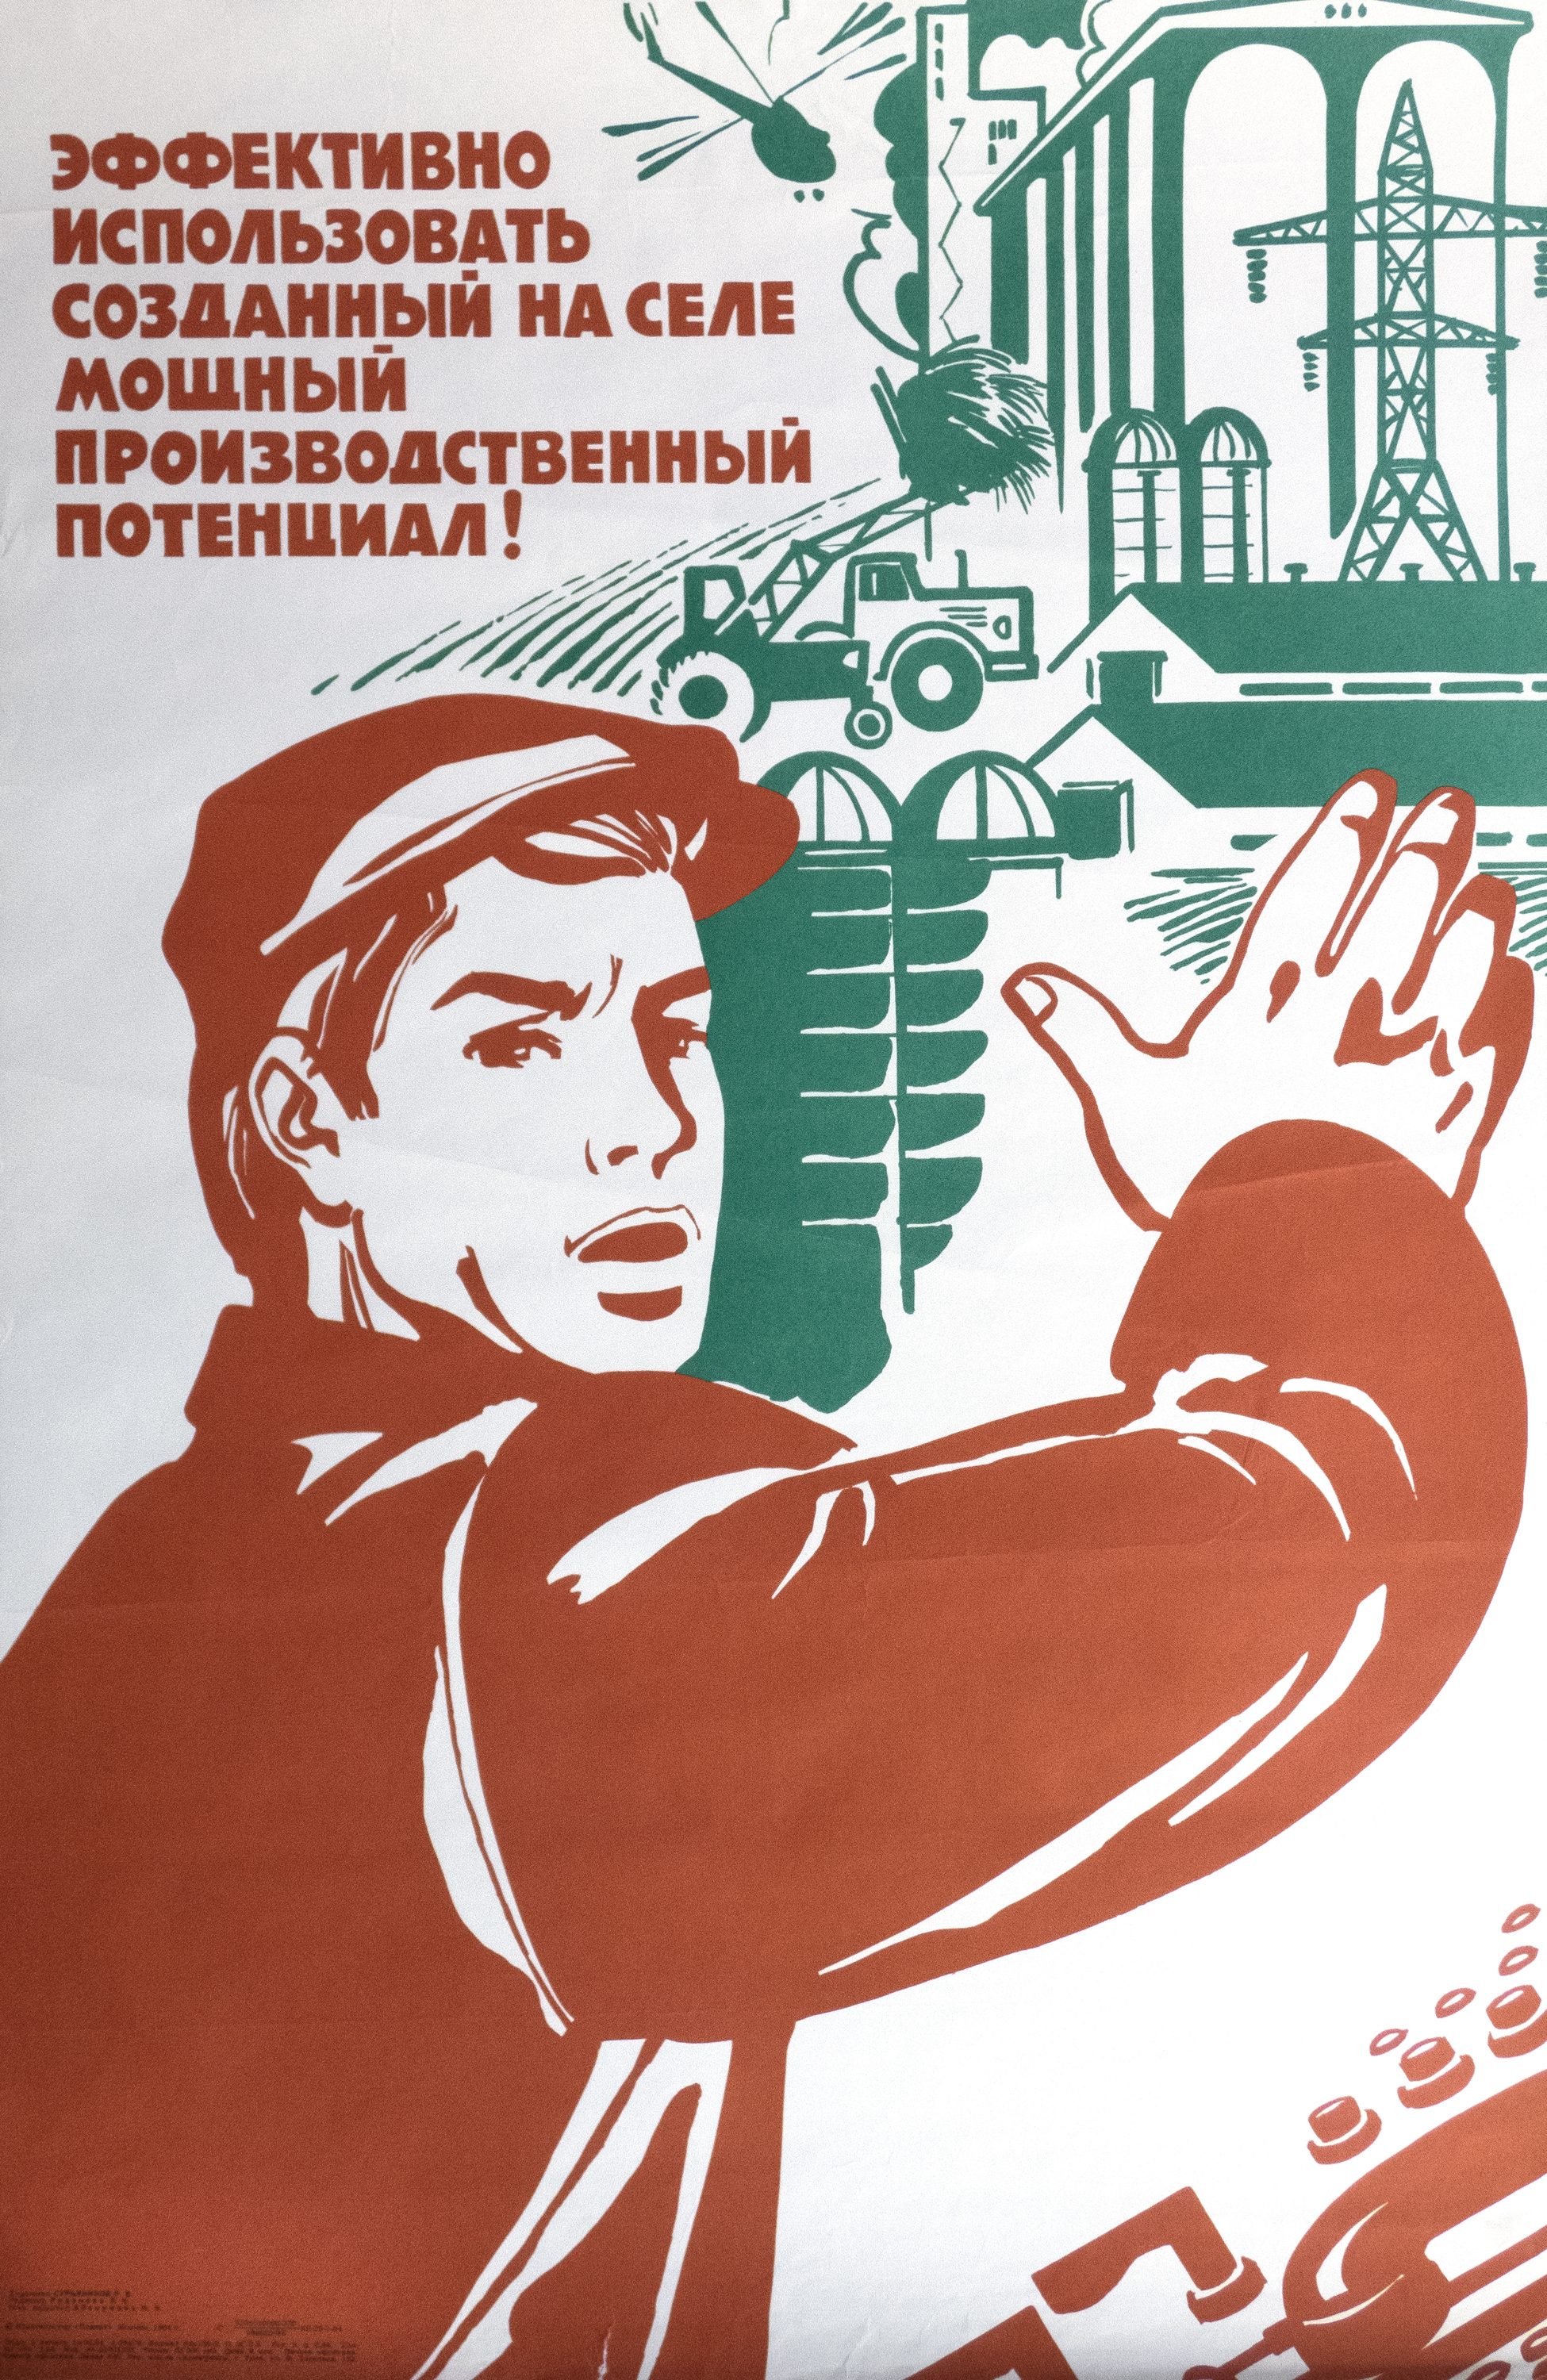 Picture Russian Posters Design School Island of Rhode | Collection |